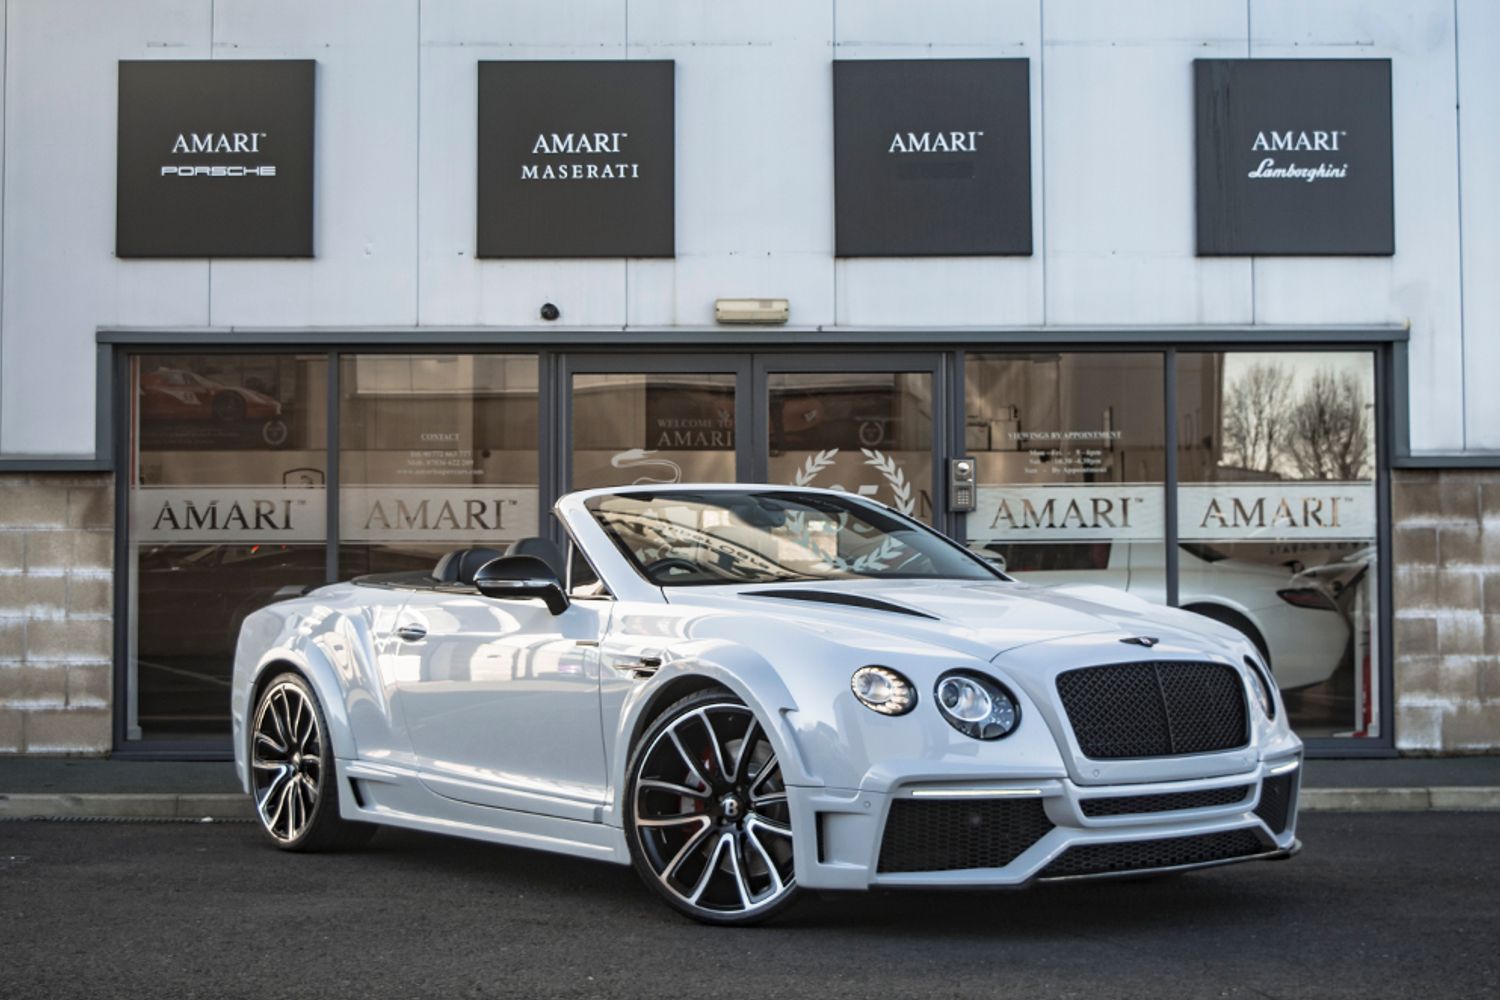 BENTLEY CONTINENTAL CONVERTIBLE ONYX - 4.0 GT V8 S MDS 2DR AUTOMATIC